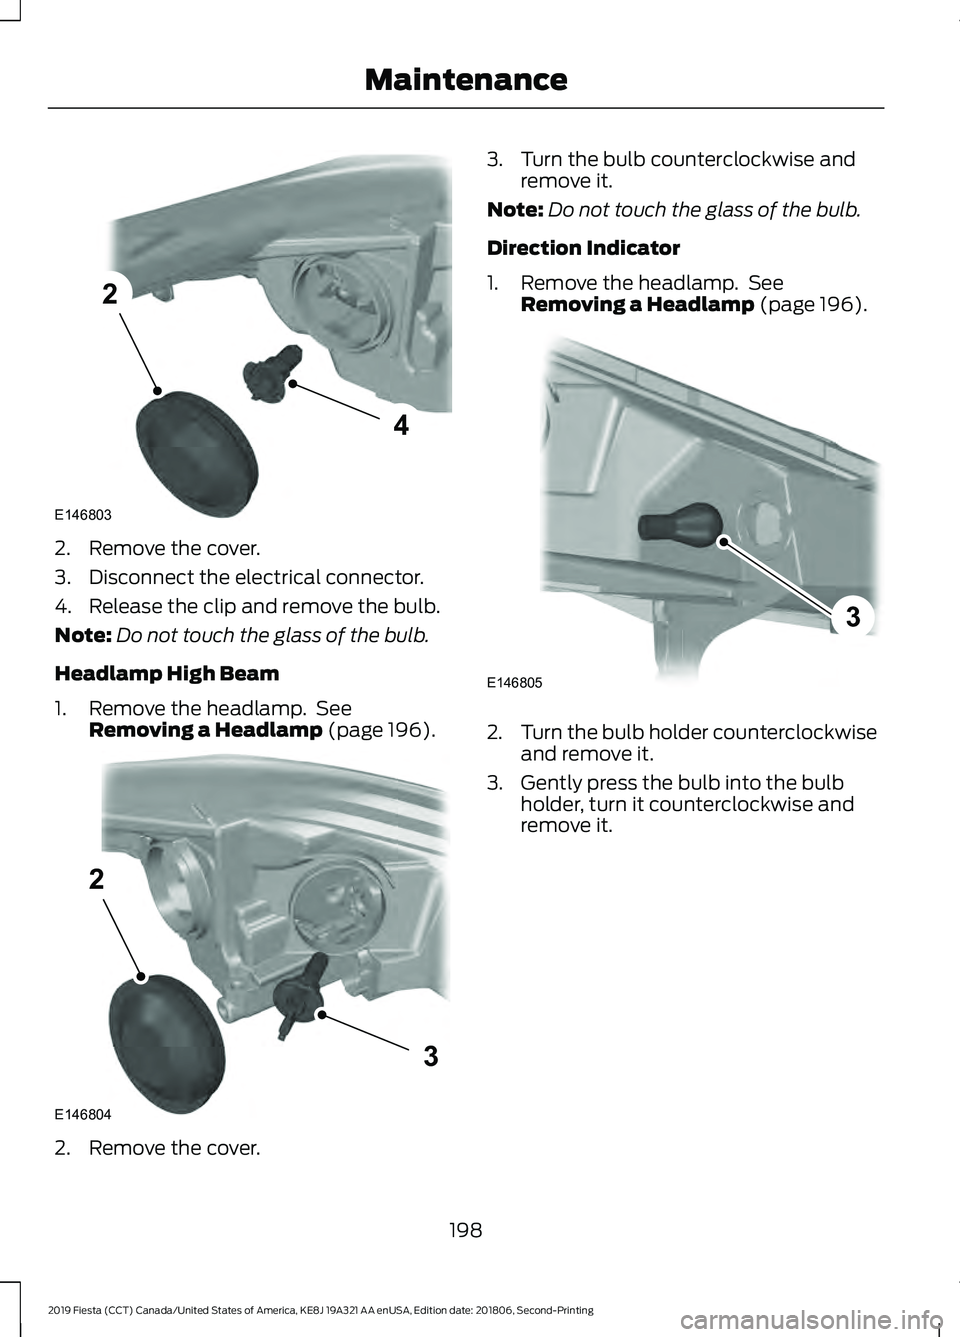 FORD FIESTA 2019  Owners Manual 2. Remove the cover.
3. Disconnect the electrical connector.
4. Release the clip and remove the bulb.
Note:
Do not touch the glass of the bulb.
Headlamp High Beam
1. Remove the headlamp.  See Removing